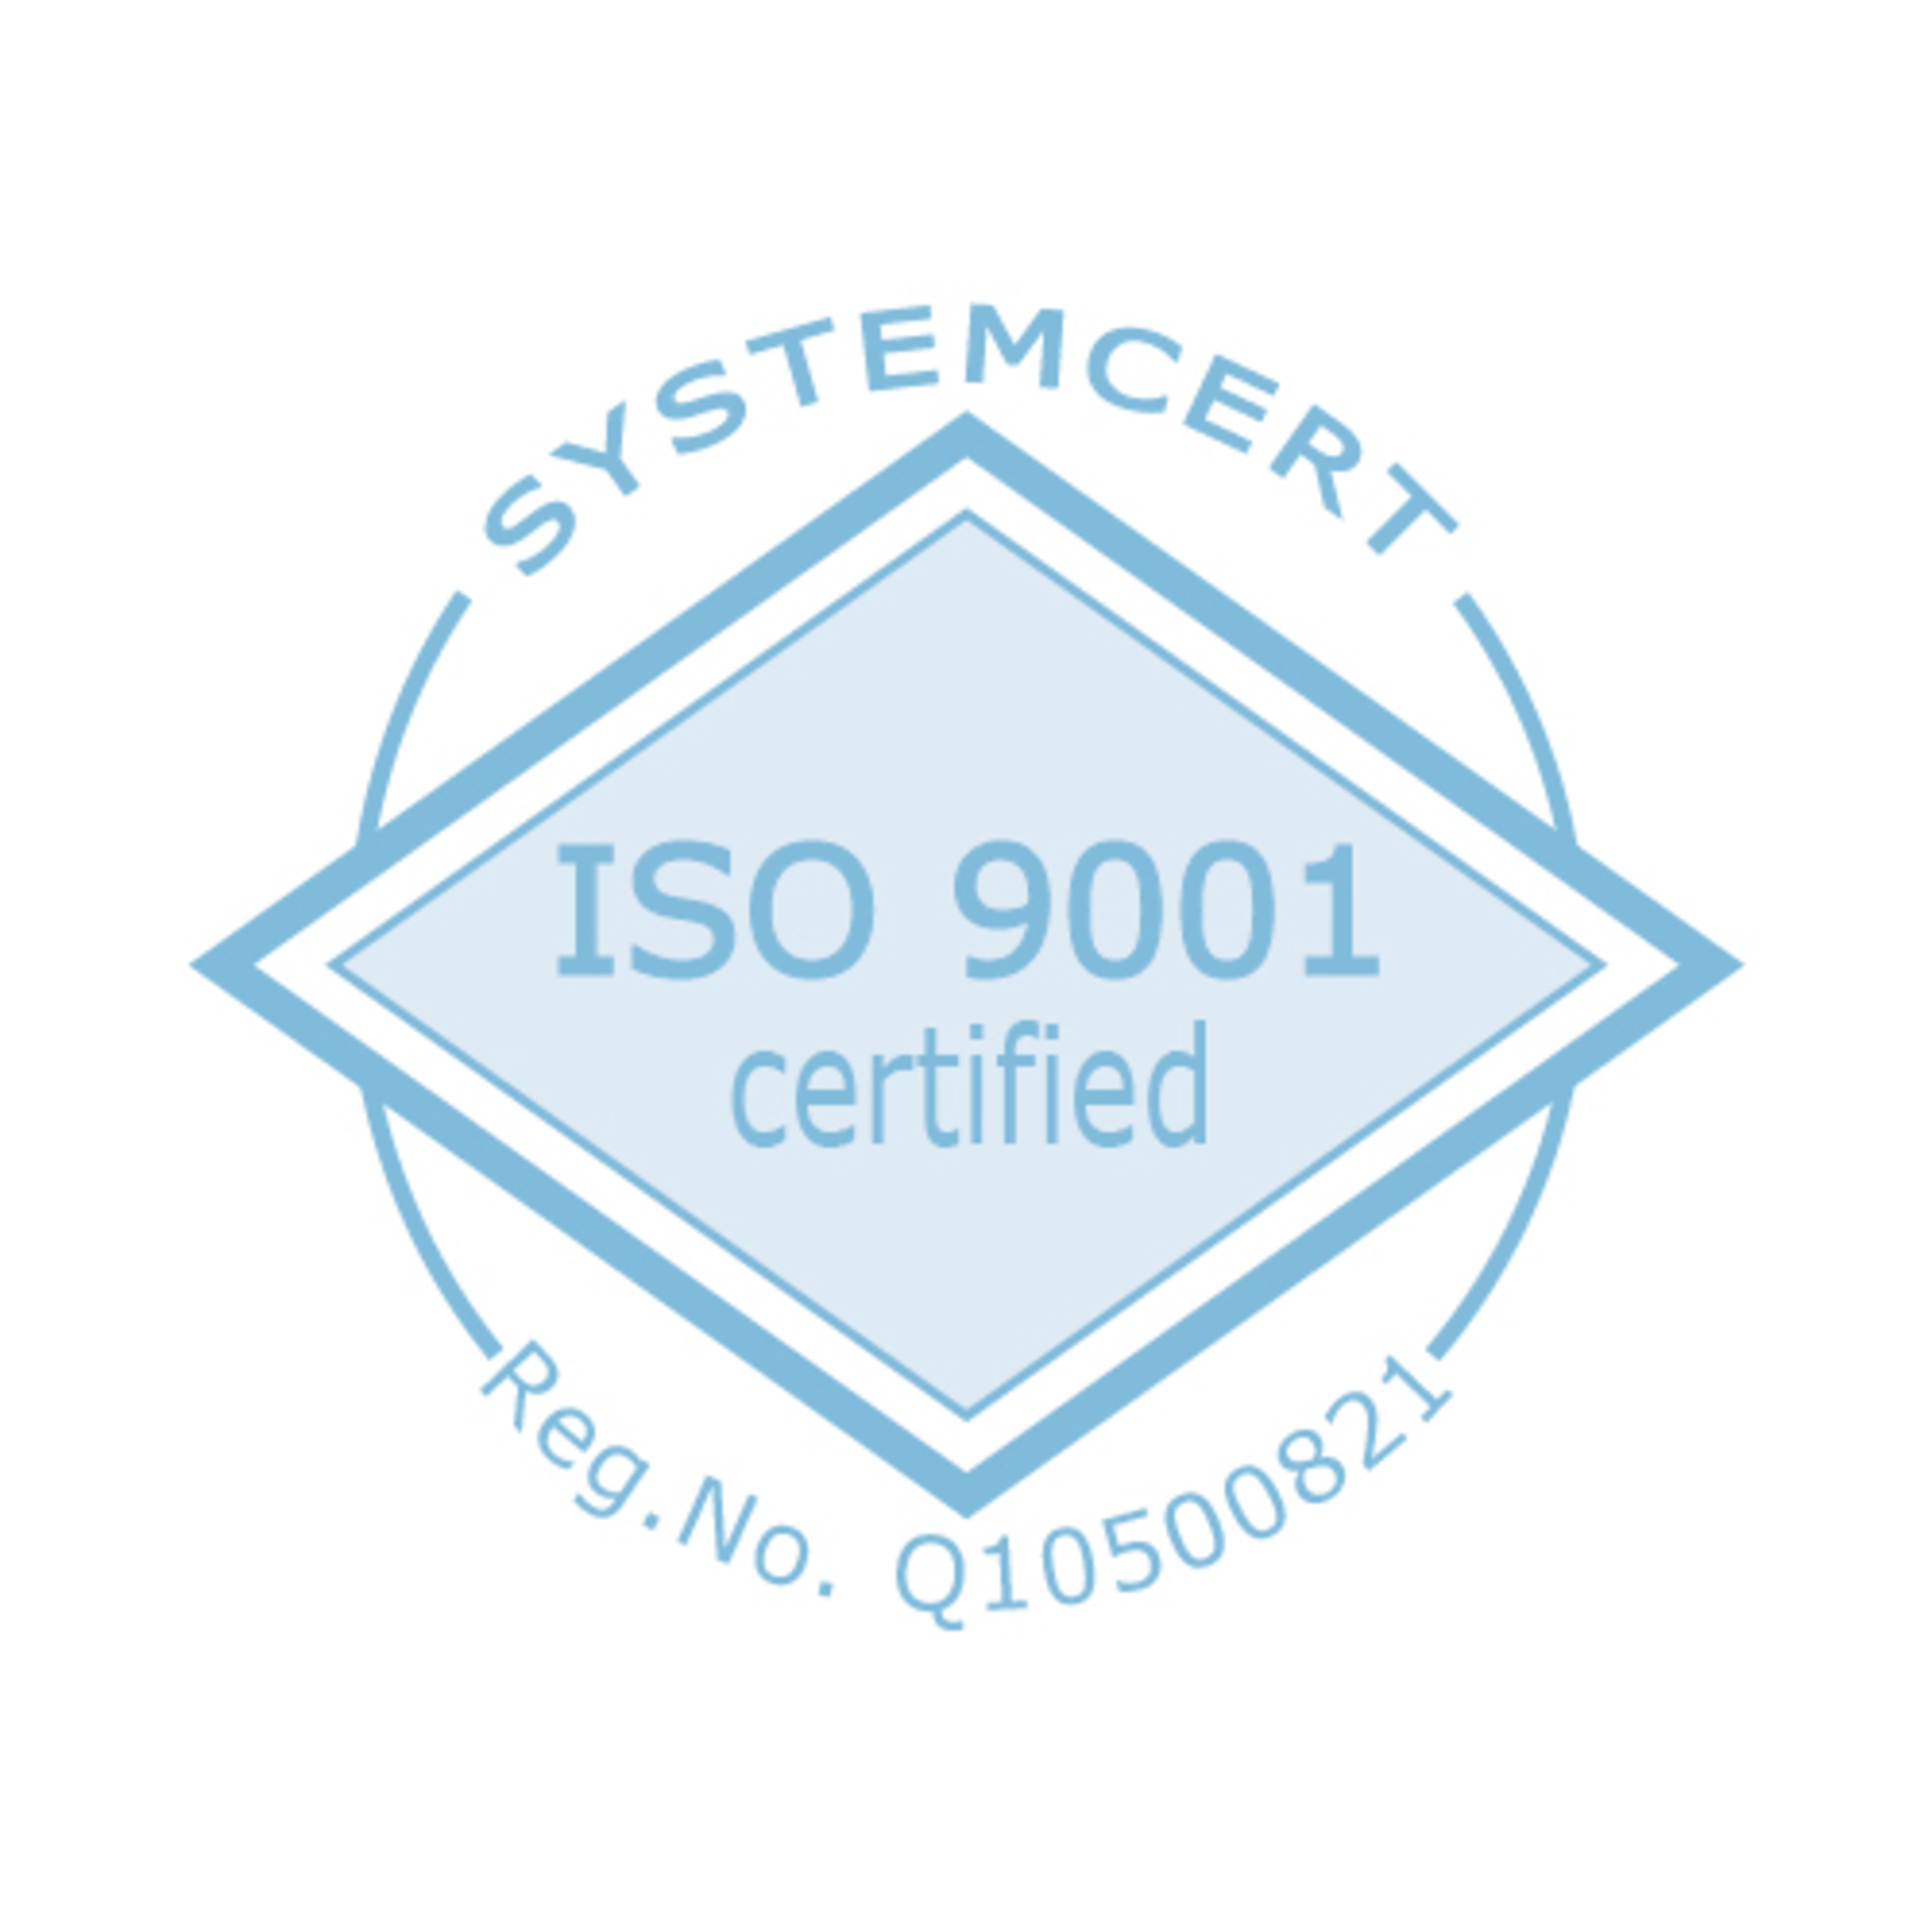 tde successfully re-certified to ISO 9001:2015